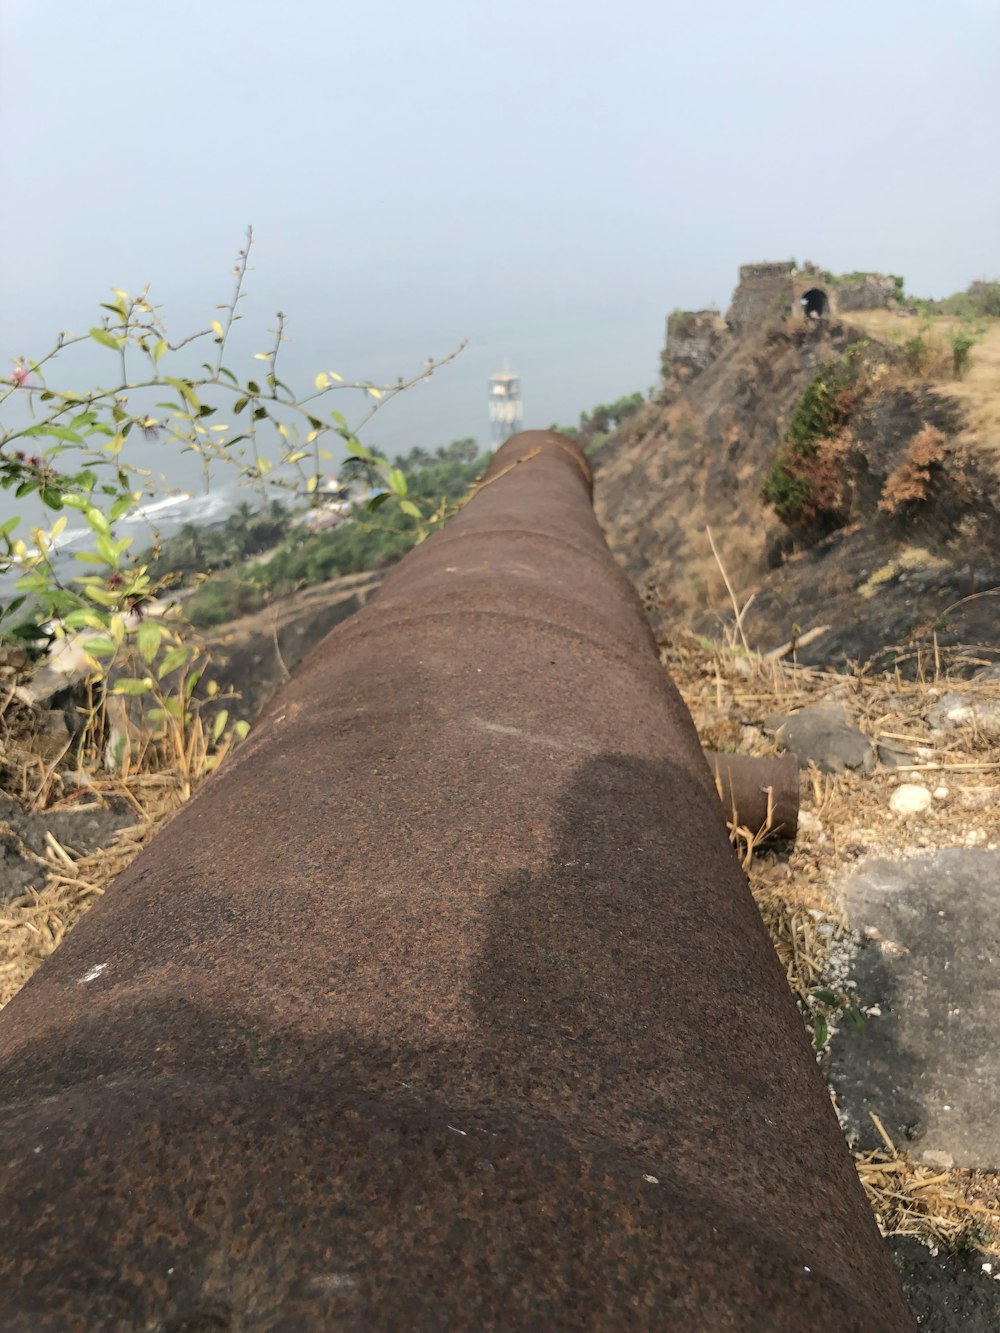 a very long pipe sitting on the side of a hill